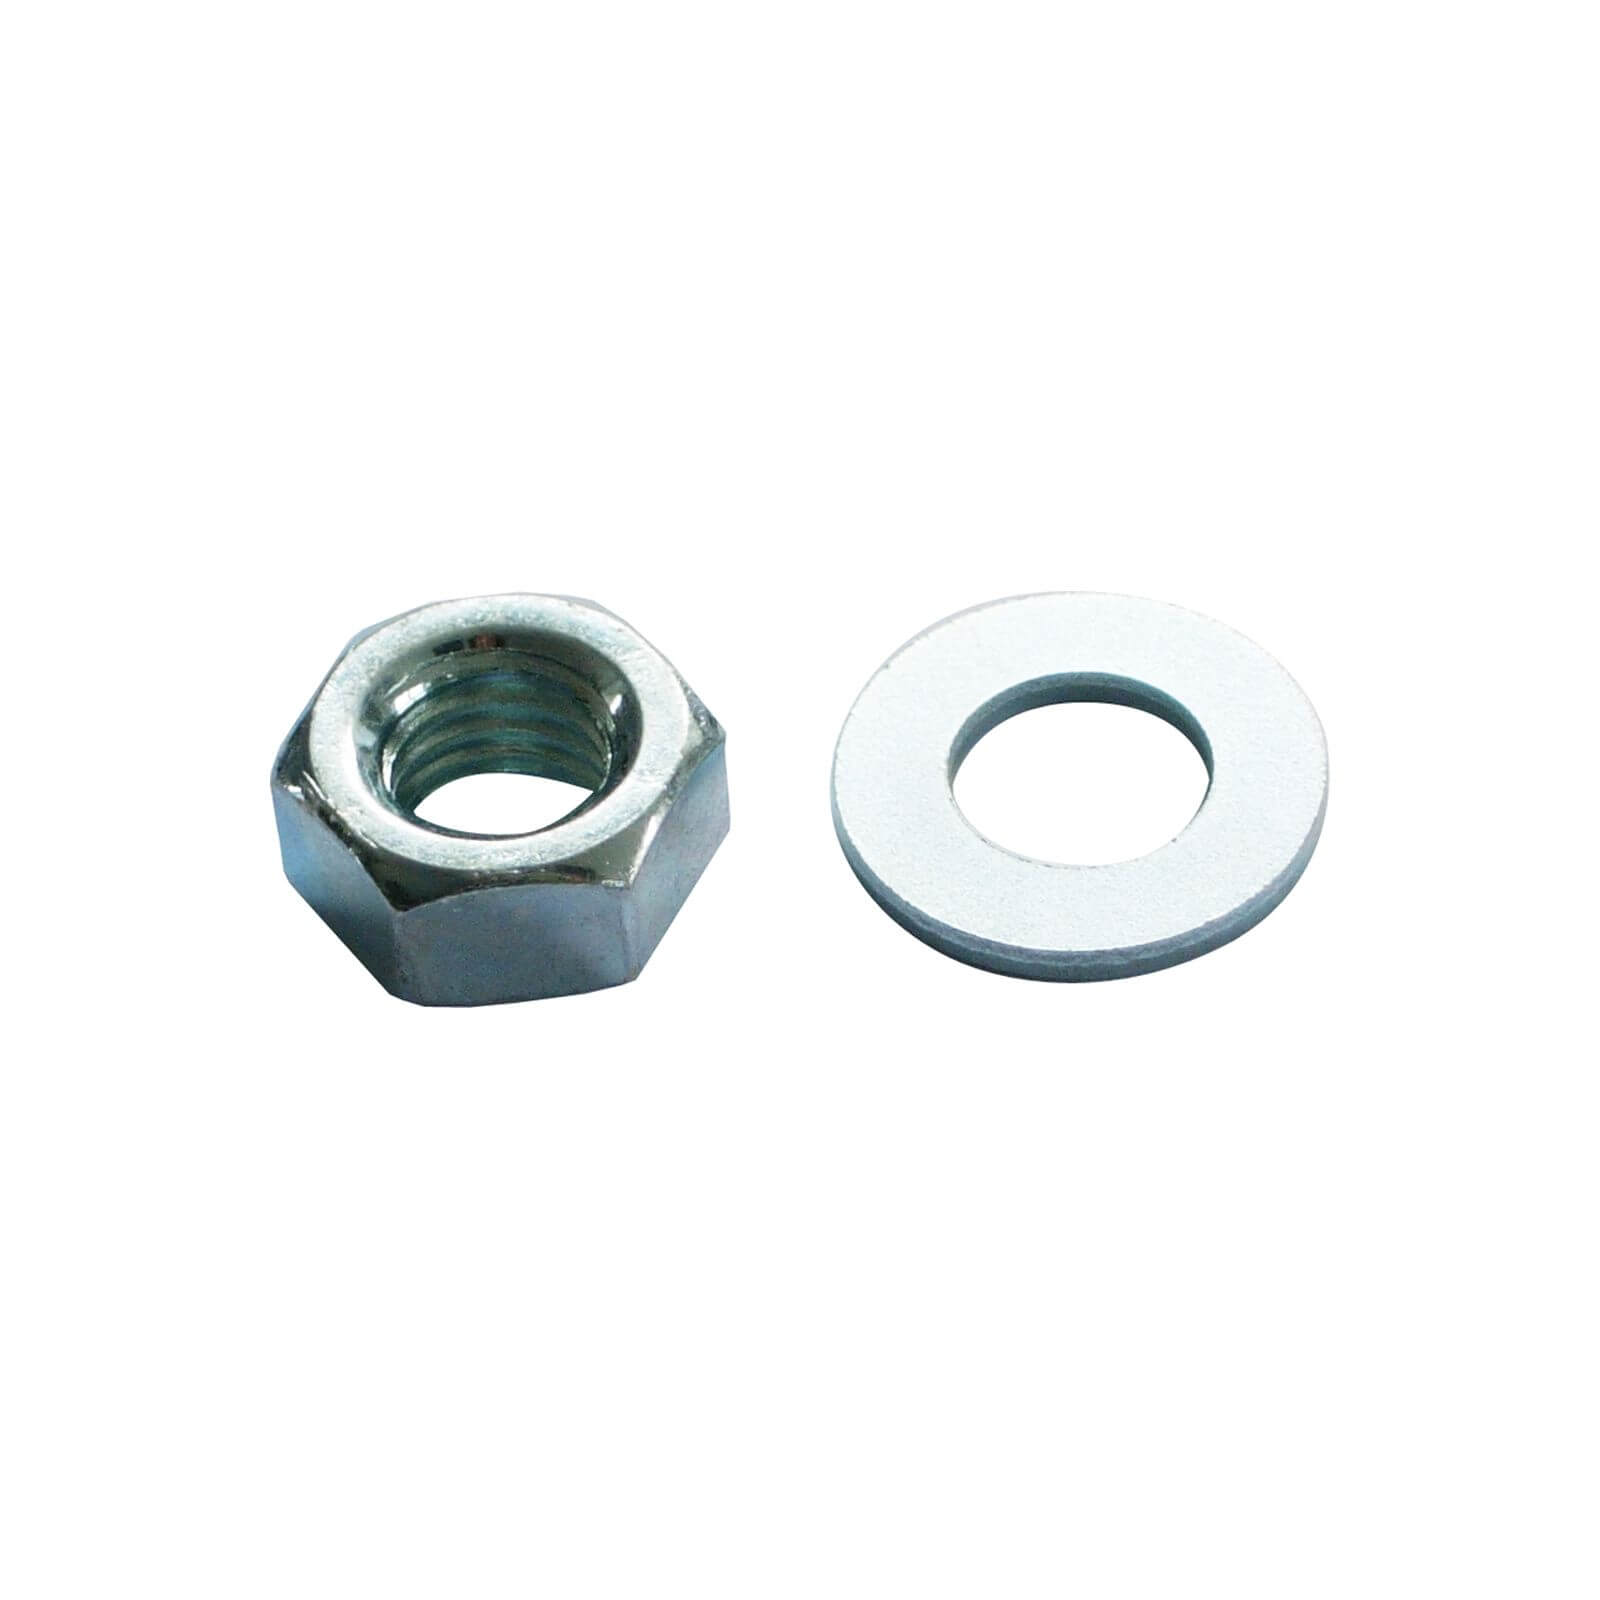 Hex Nut & Washer - Bright Zinc Plated - M12 - 5 Pack